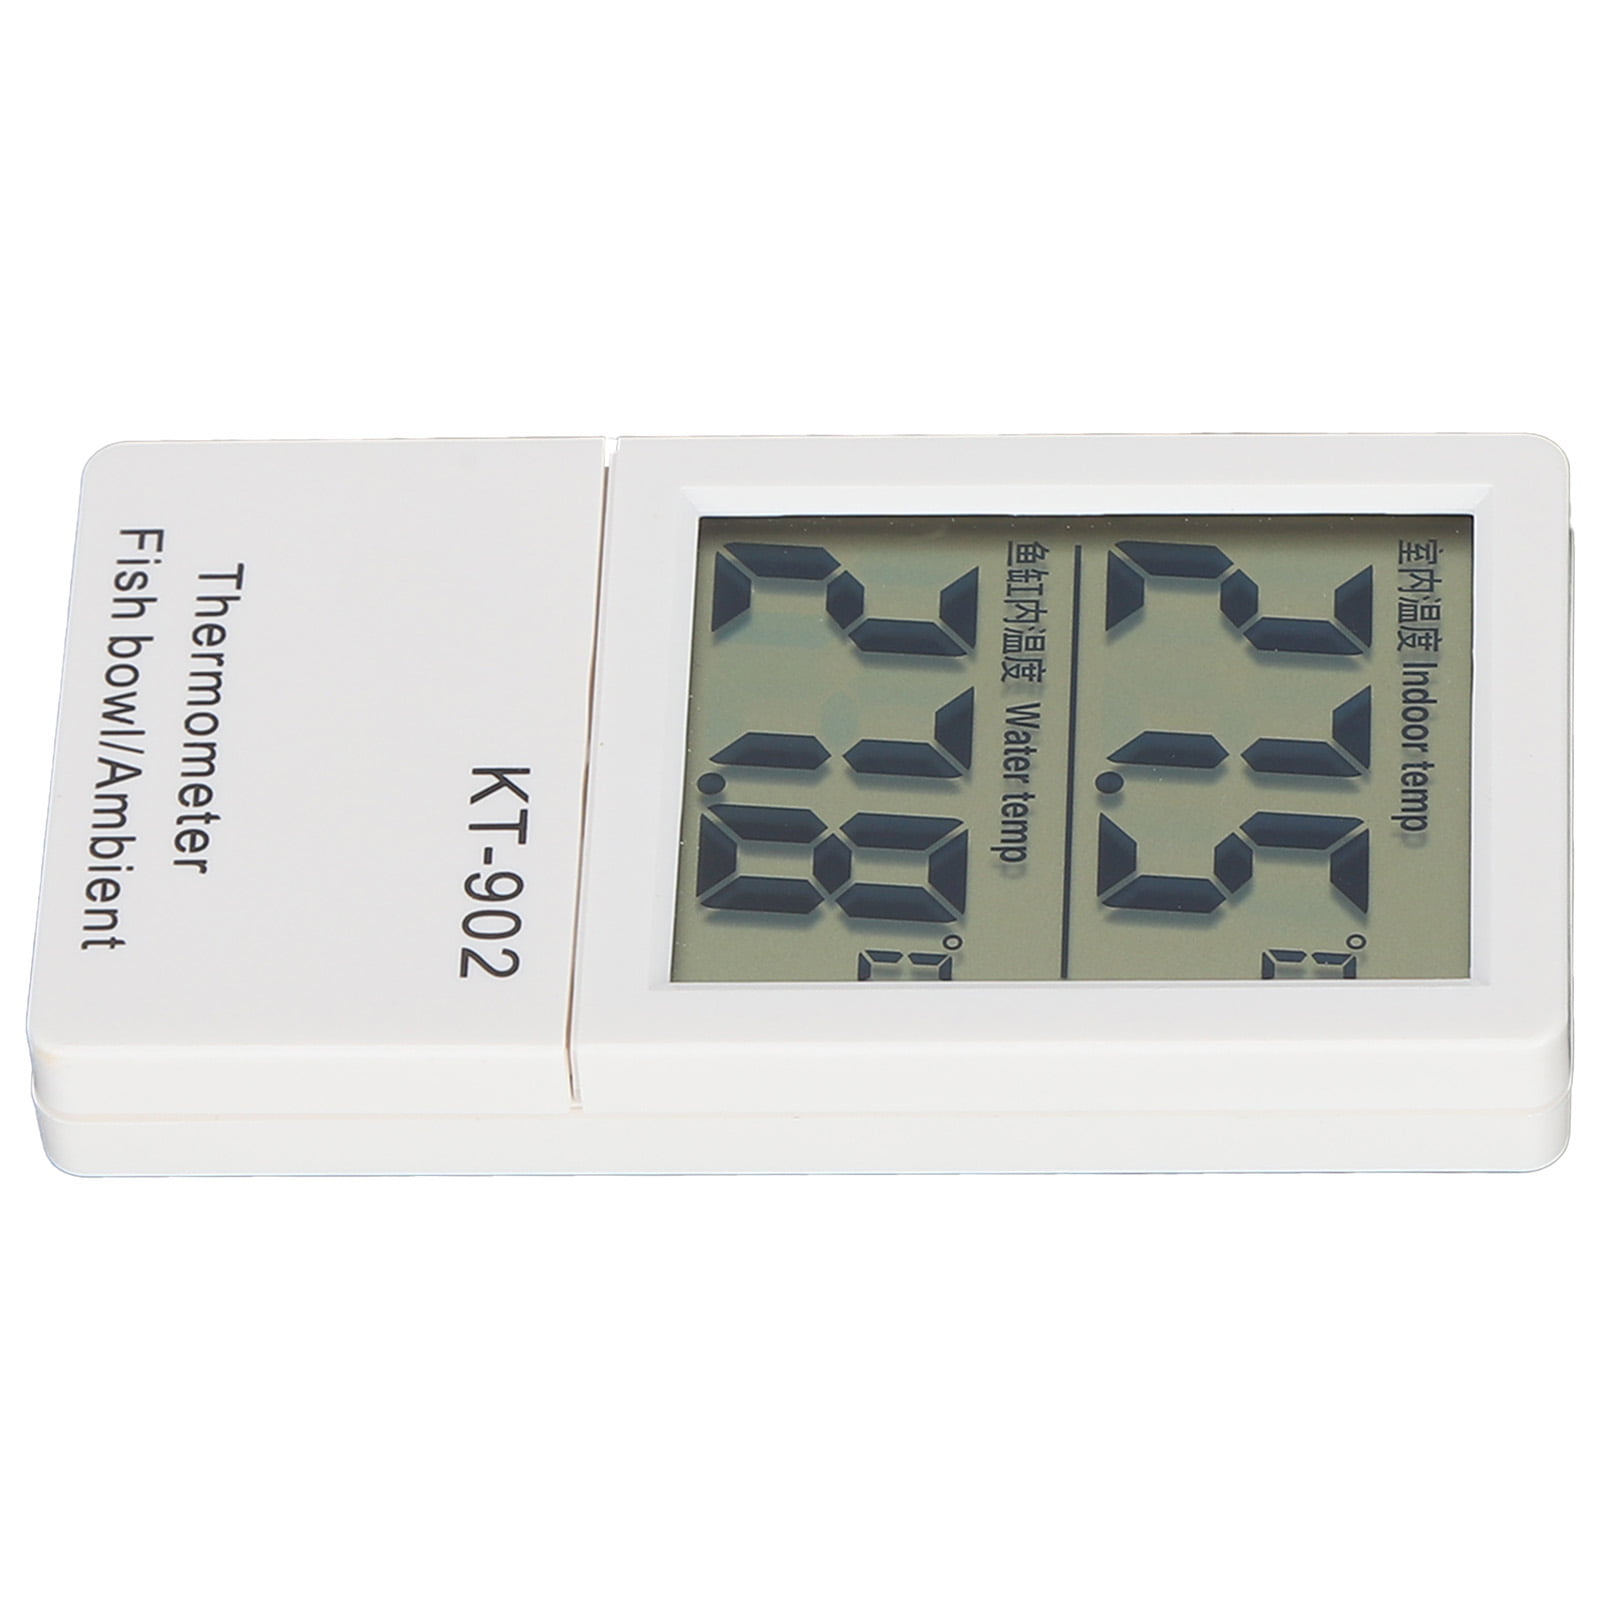 NEW TINY SEAS Digital LCD HYDROPONIC Temperature Thermometer FREE EXTRA BATTERY 